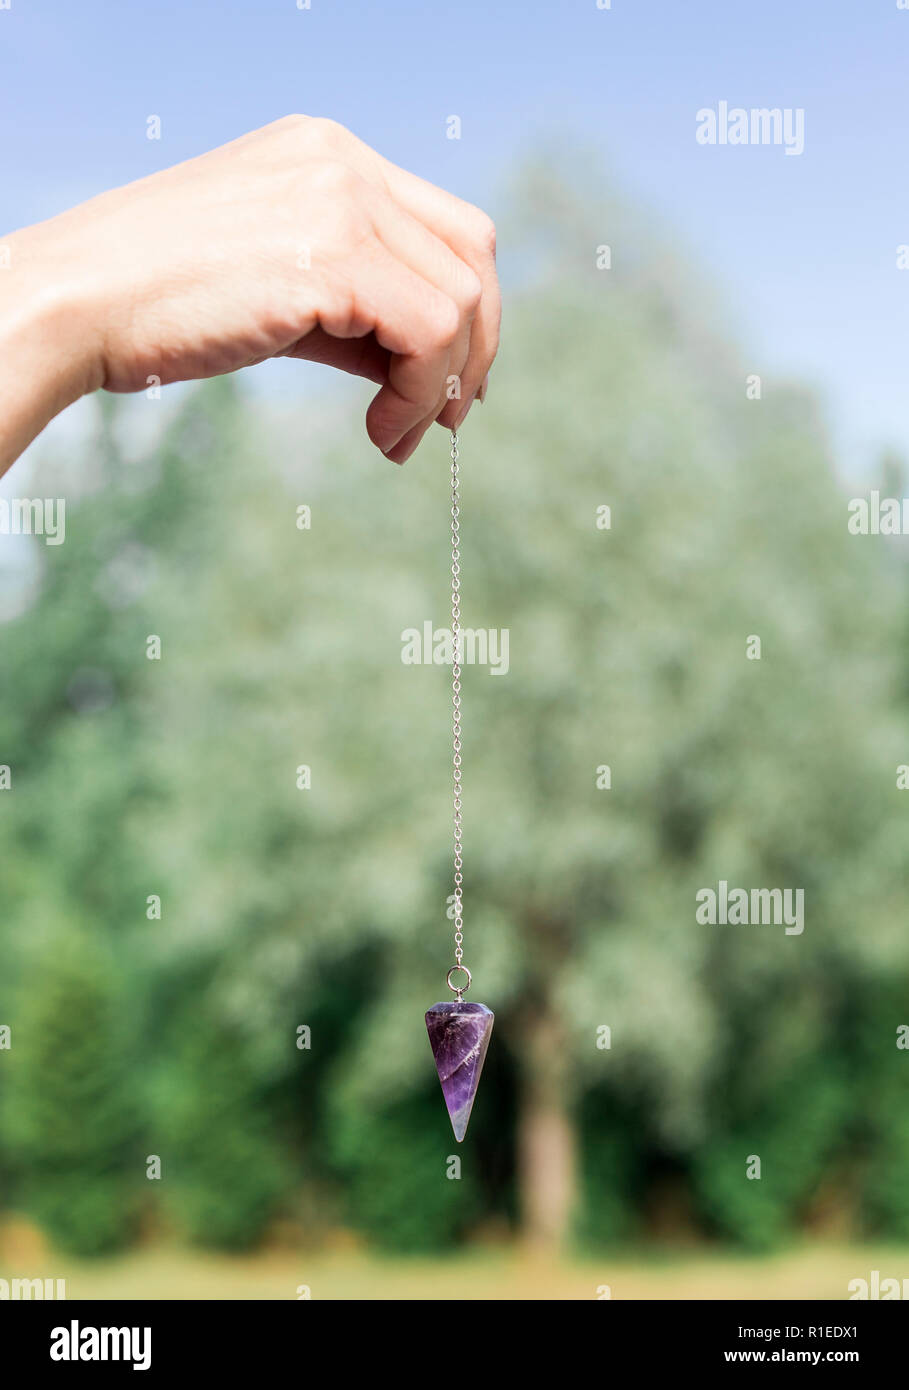 Purple natural Amethyst crystal quartz pendulum hanging on chain on green outdoors nature background. Stock Photo